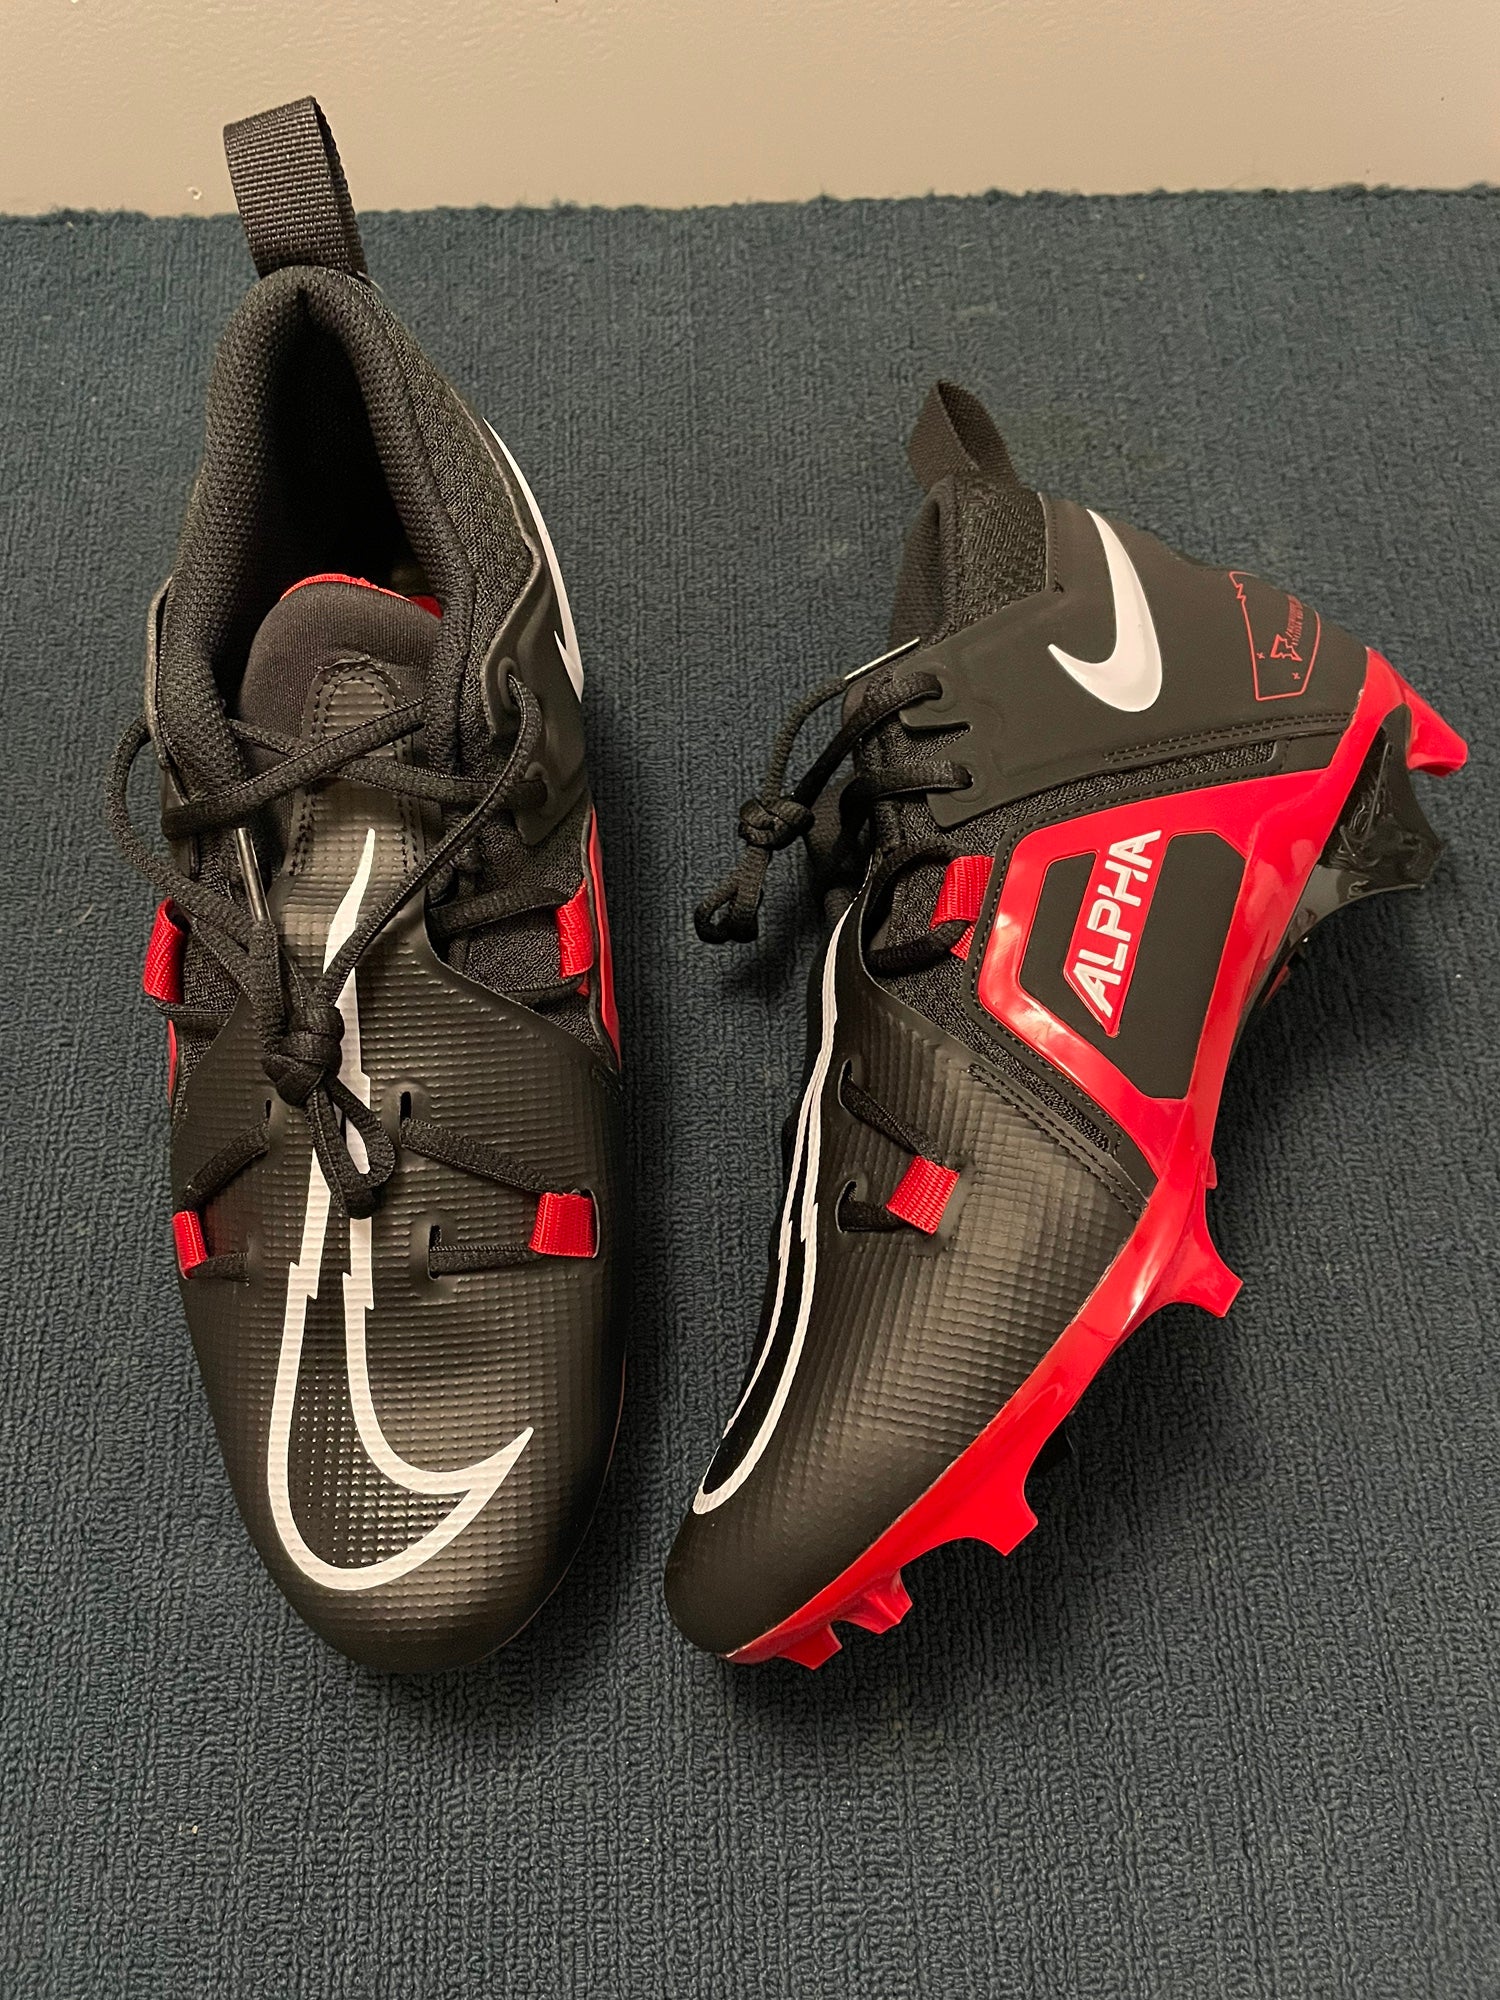 Hypebeast Football Cleats Red / 9.5 M